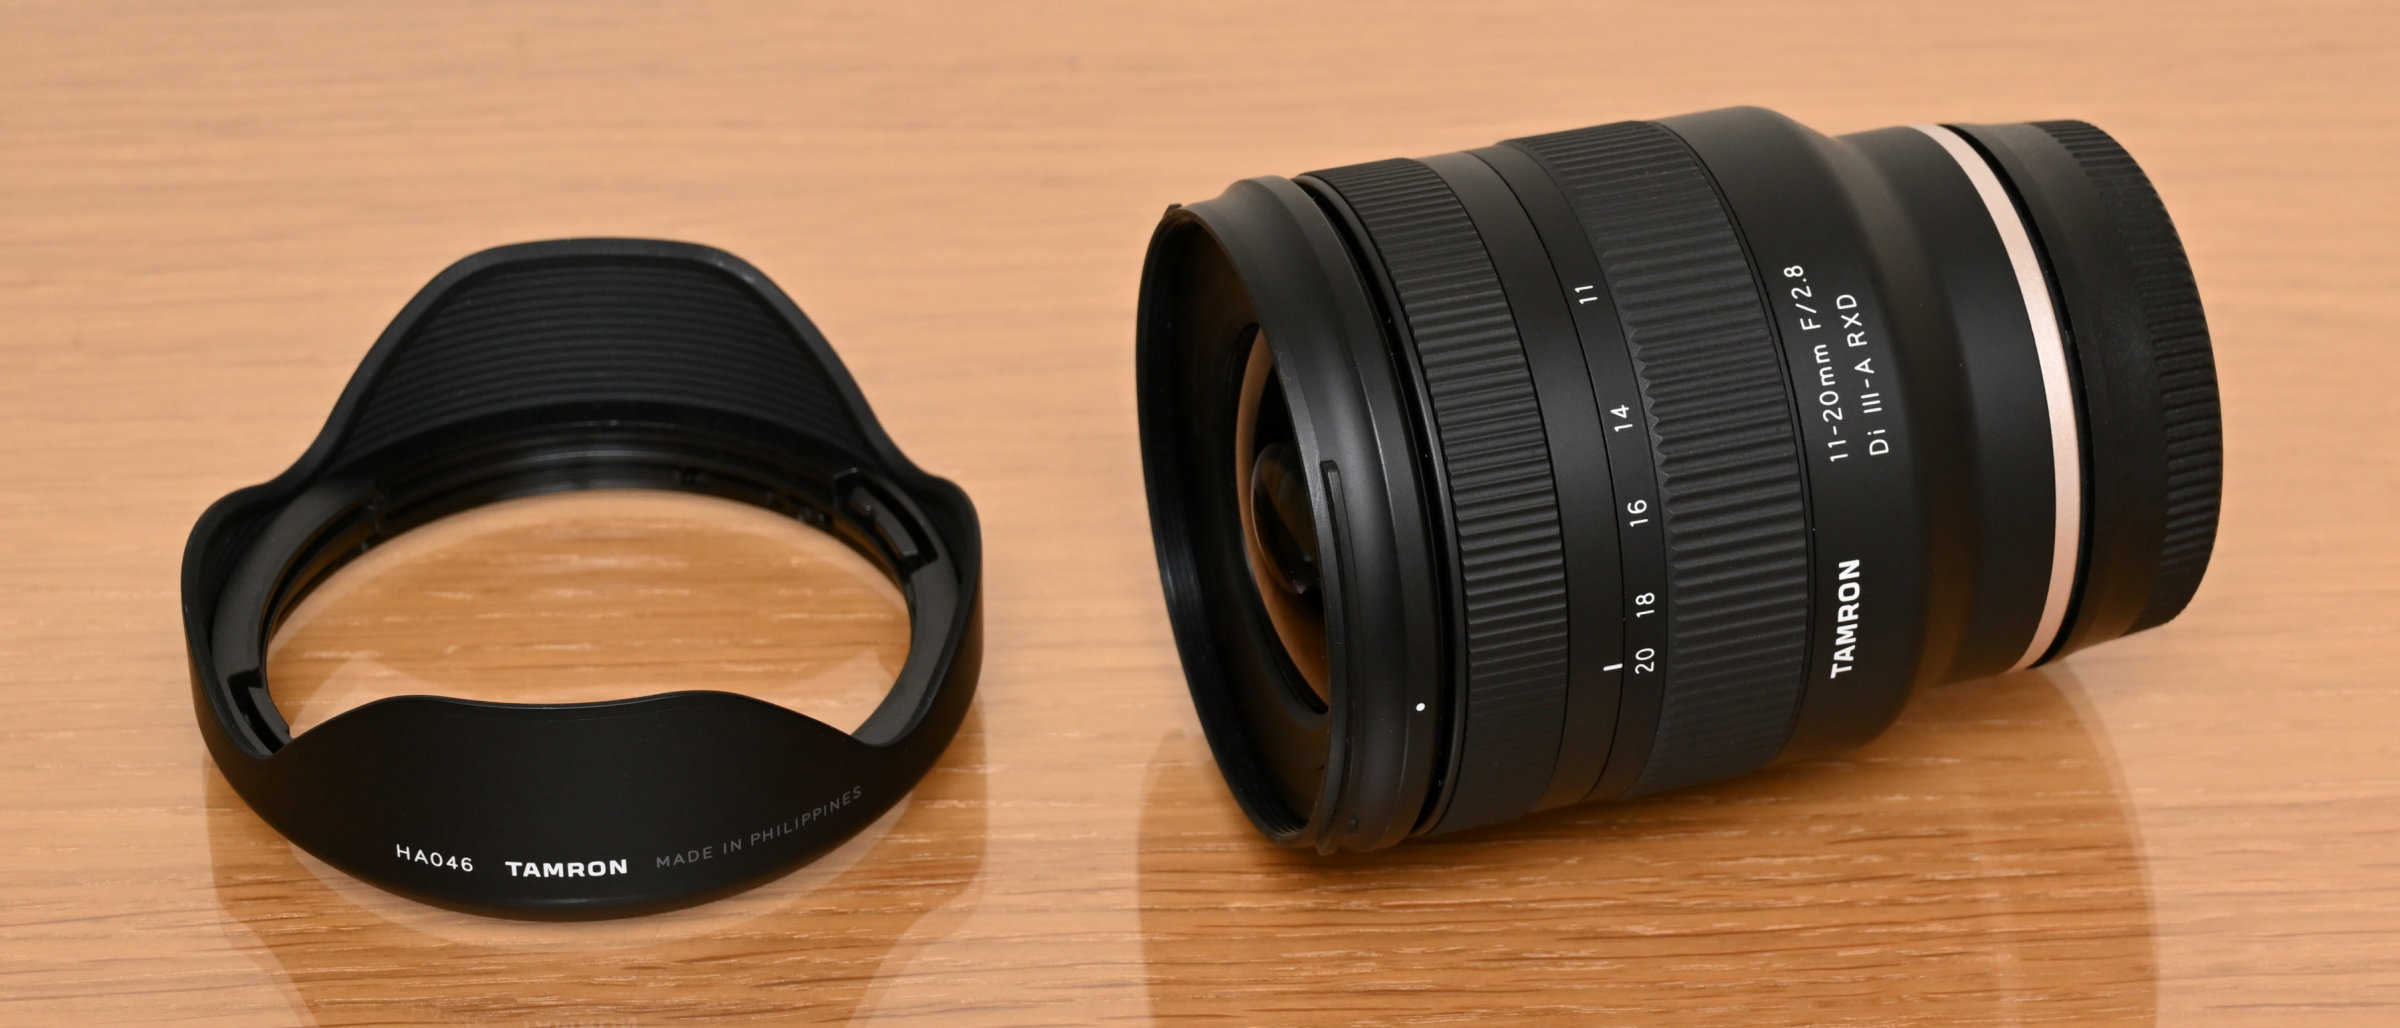  TAMRON 11-20MM F/2.8 DI III-A RXD for Sony E APS-C Mirrorless  Cameras : Electronics